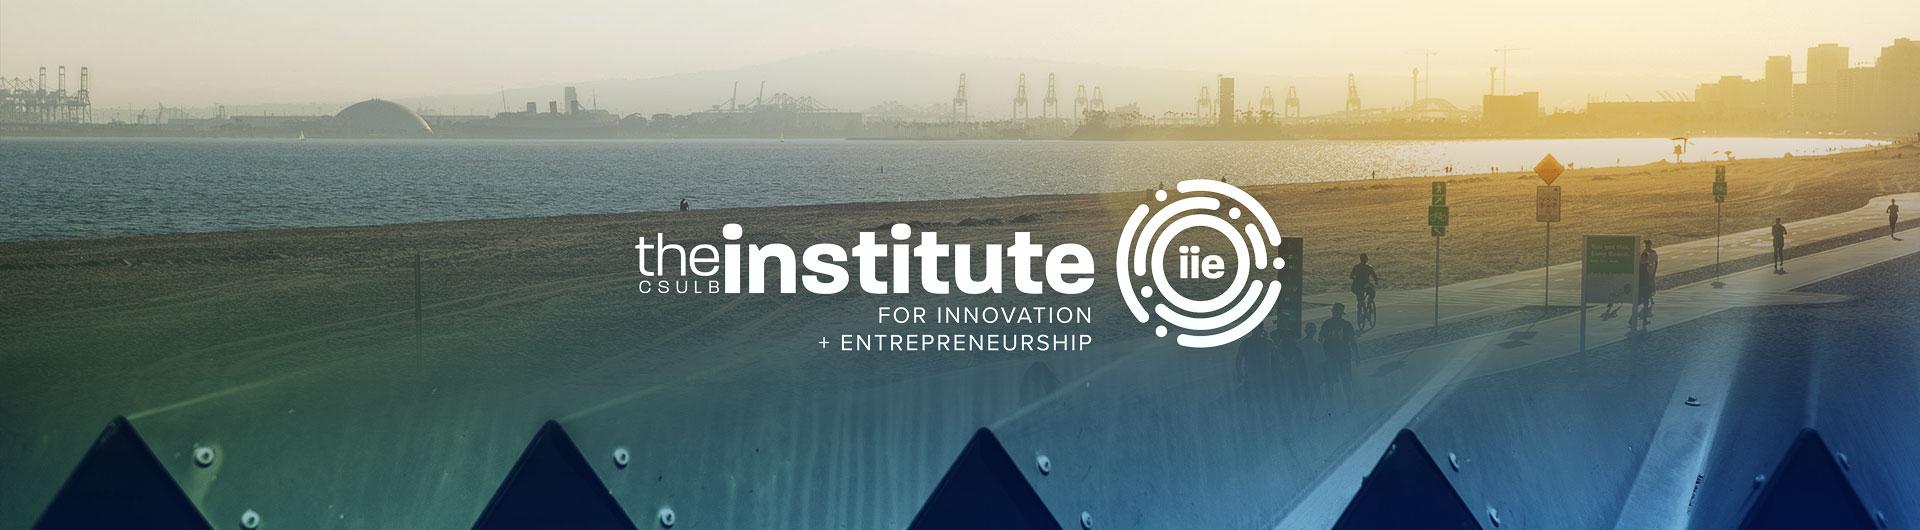 image of Long Beach with CSULB pyramids on the bottom of banner with the IIE logo in the center